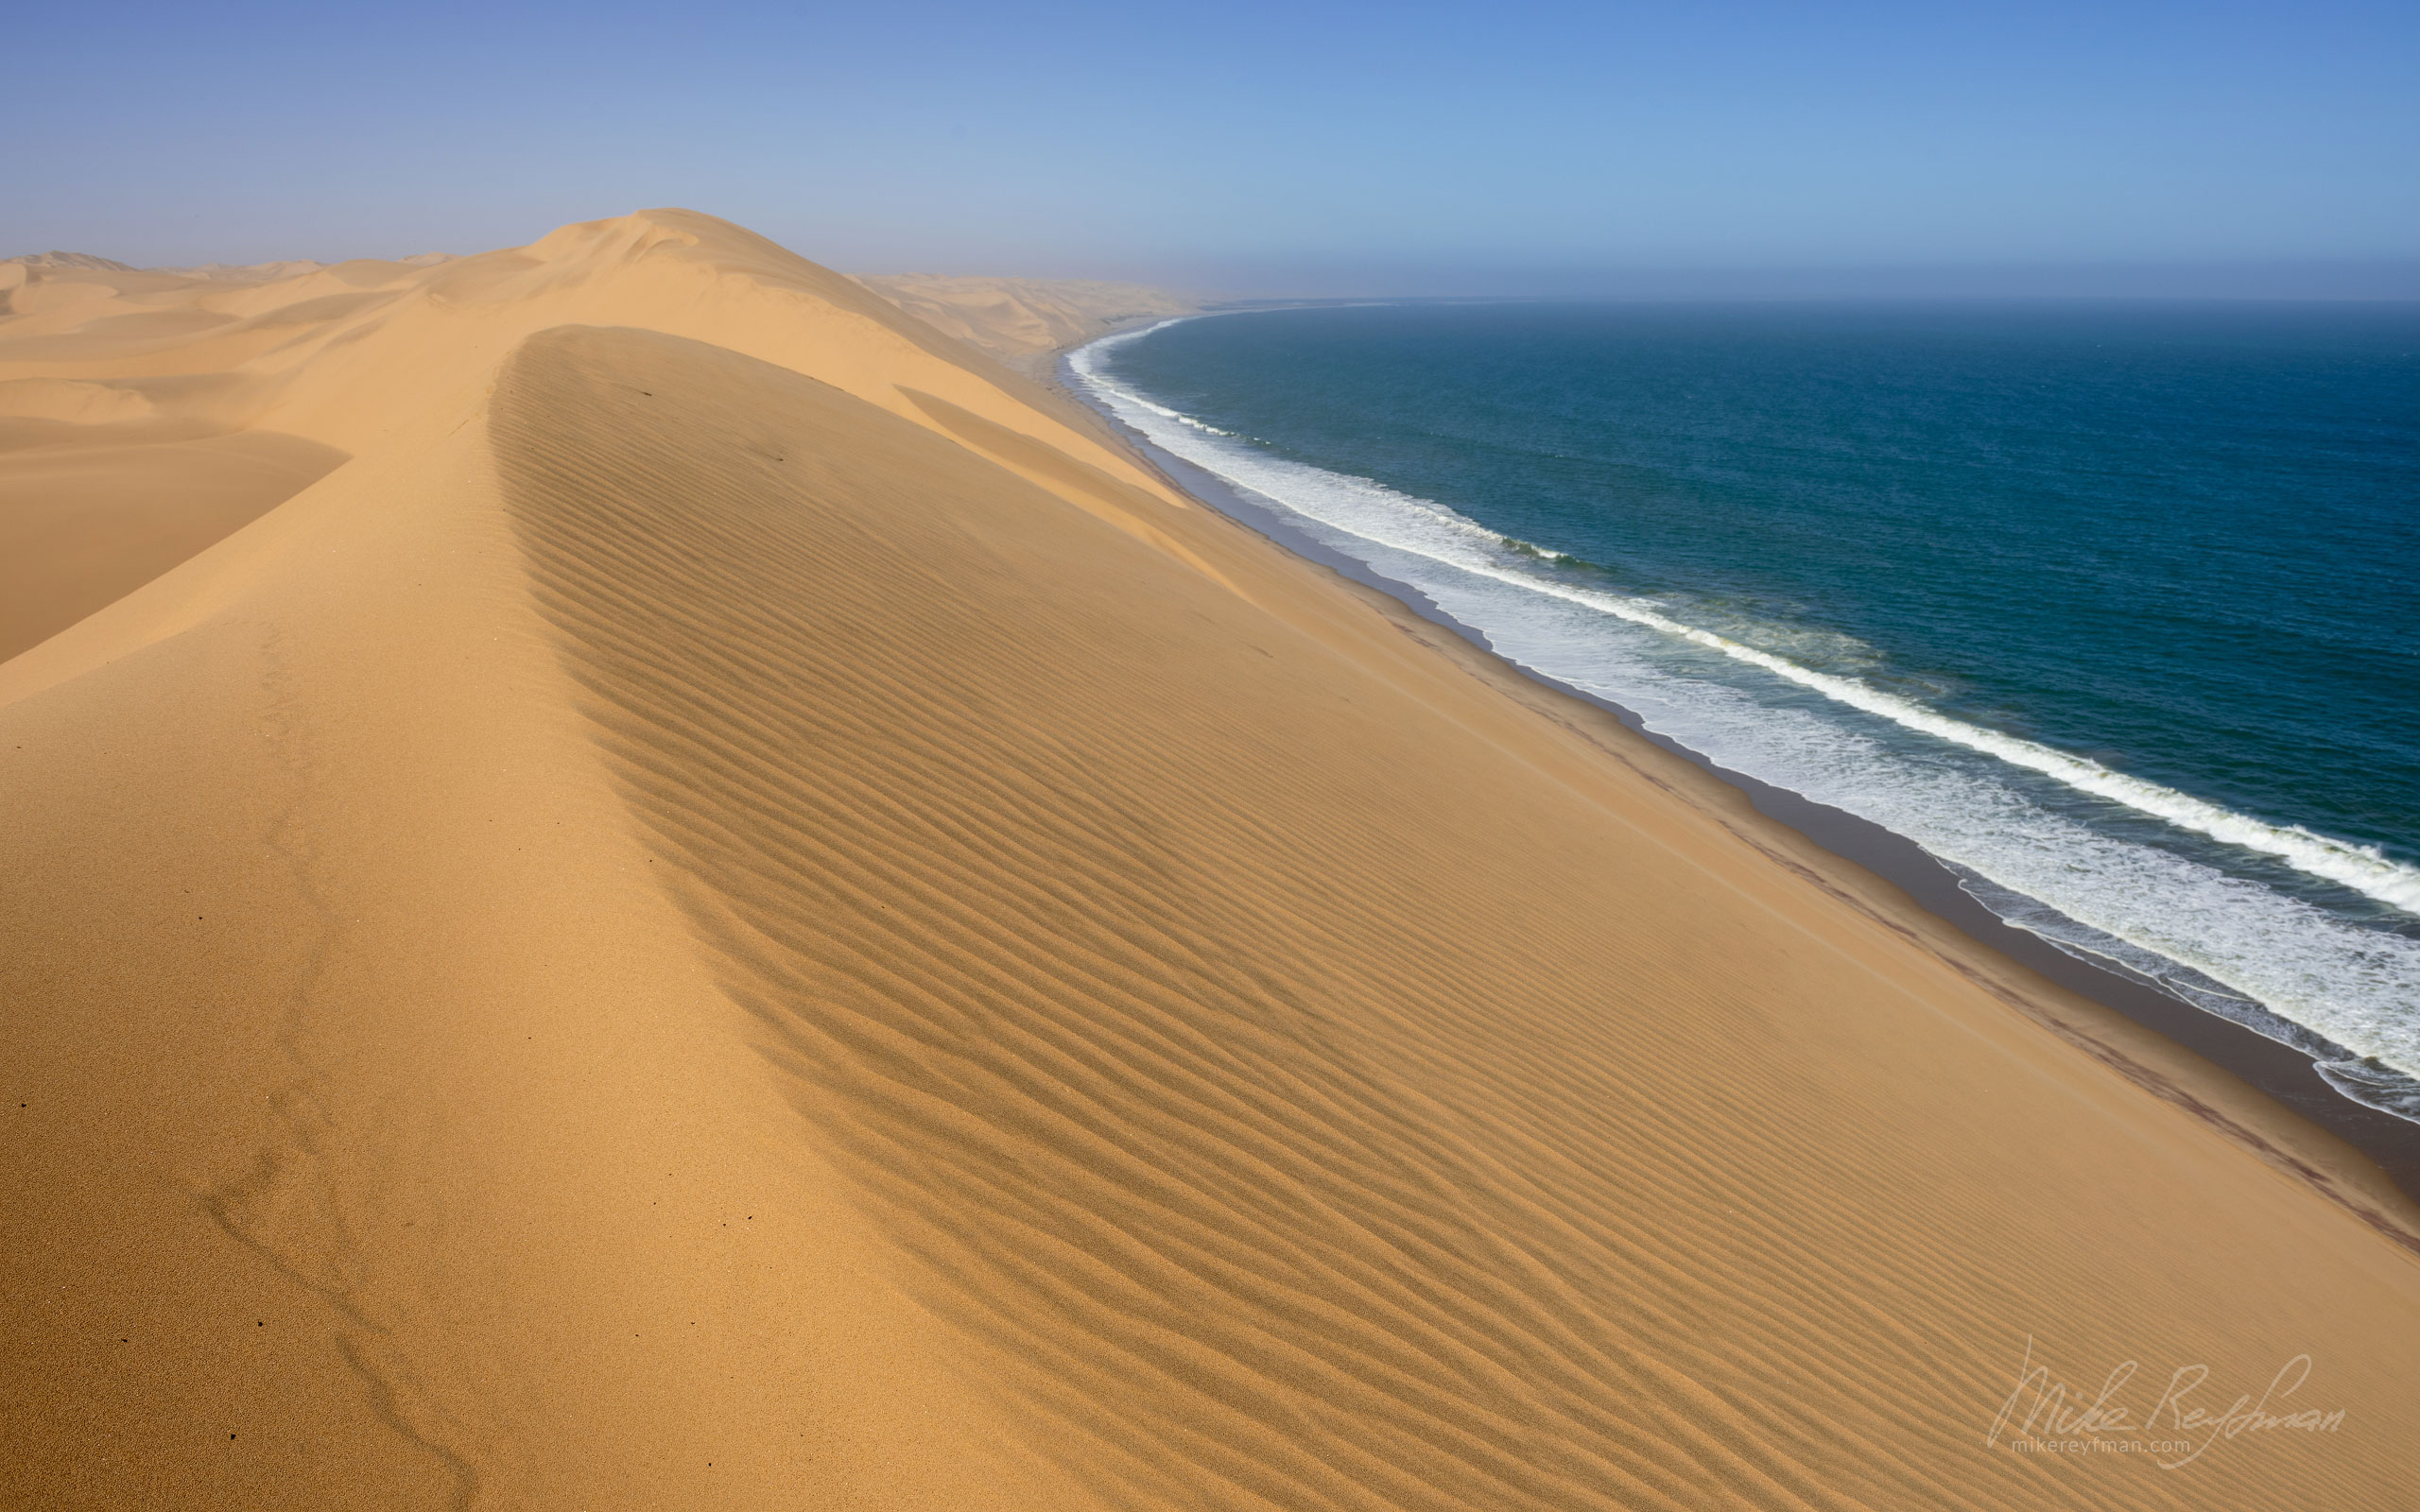 Atlantic Ocean and Sand Dunes. Namib Skeleton Coast National Park, Namibia SCW_025_10P9175 - Shipwrecks and Endless Dunes of Namib Skeleton Coast NP, Dense ocean fogs of the Benguela Current, Cape Fur seals, and Walvis Bay Salt Works. Namibia.  - Mike Reyfman Photography